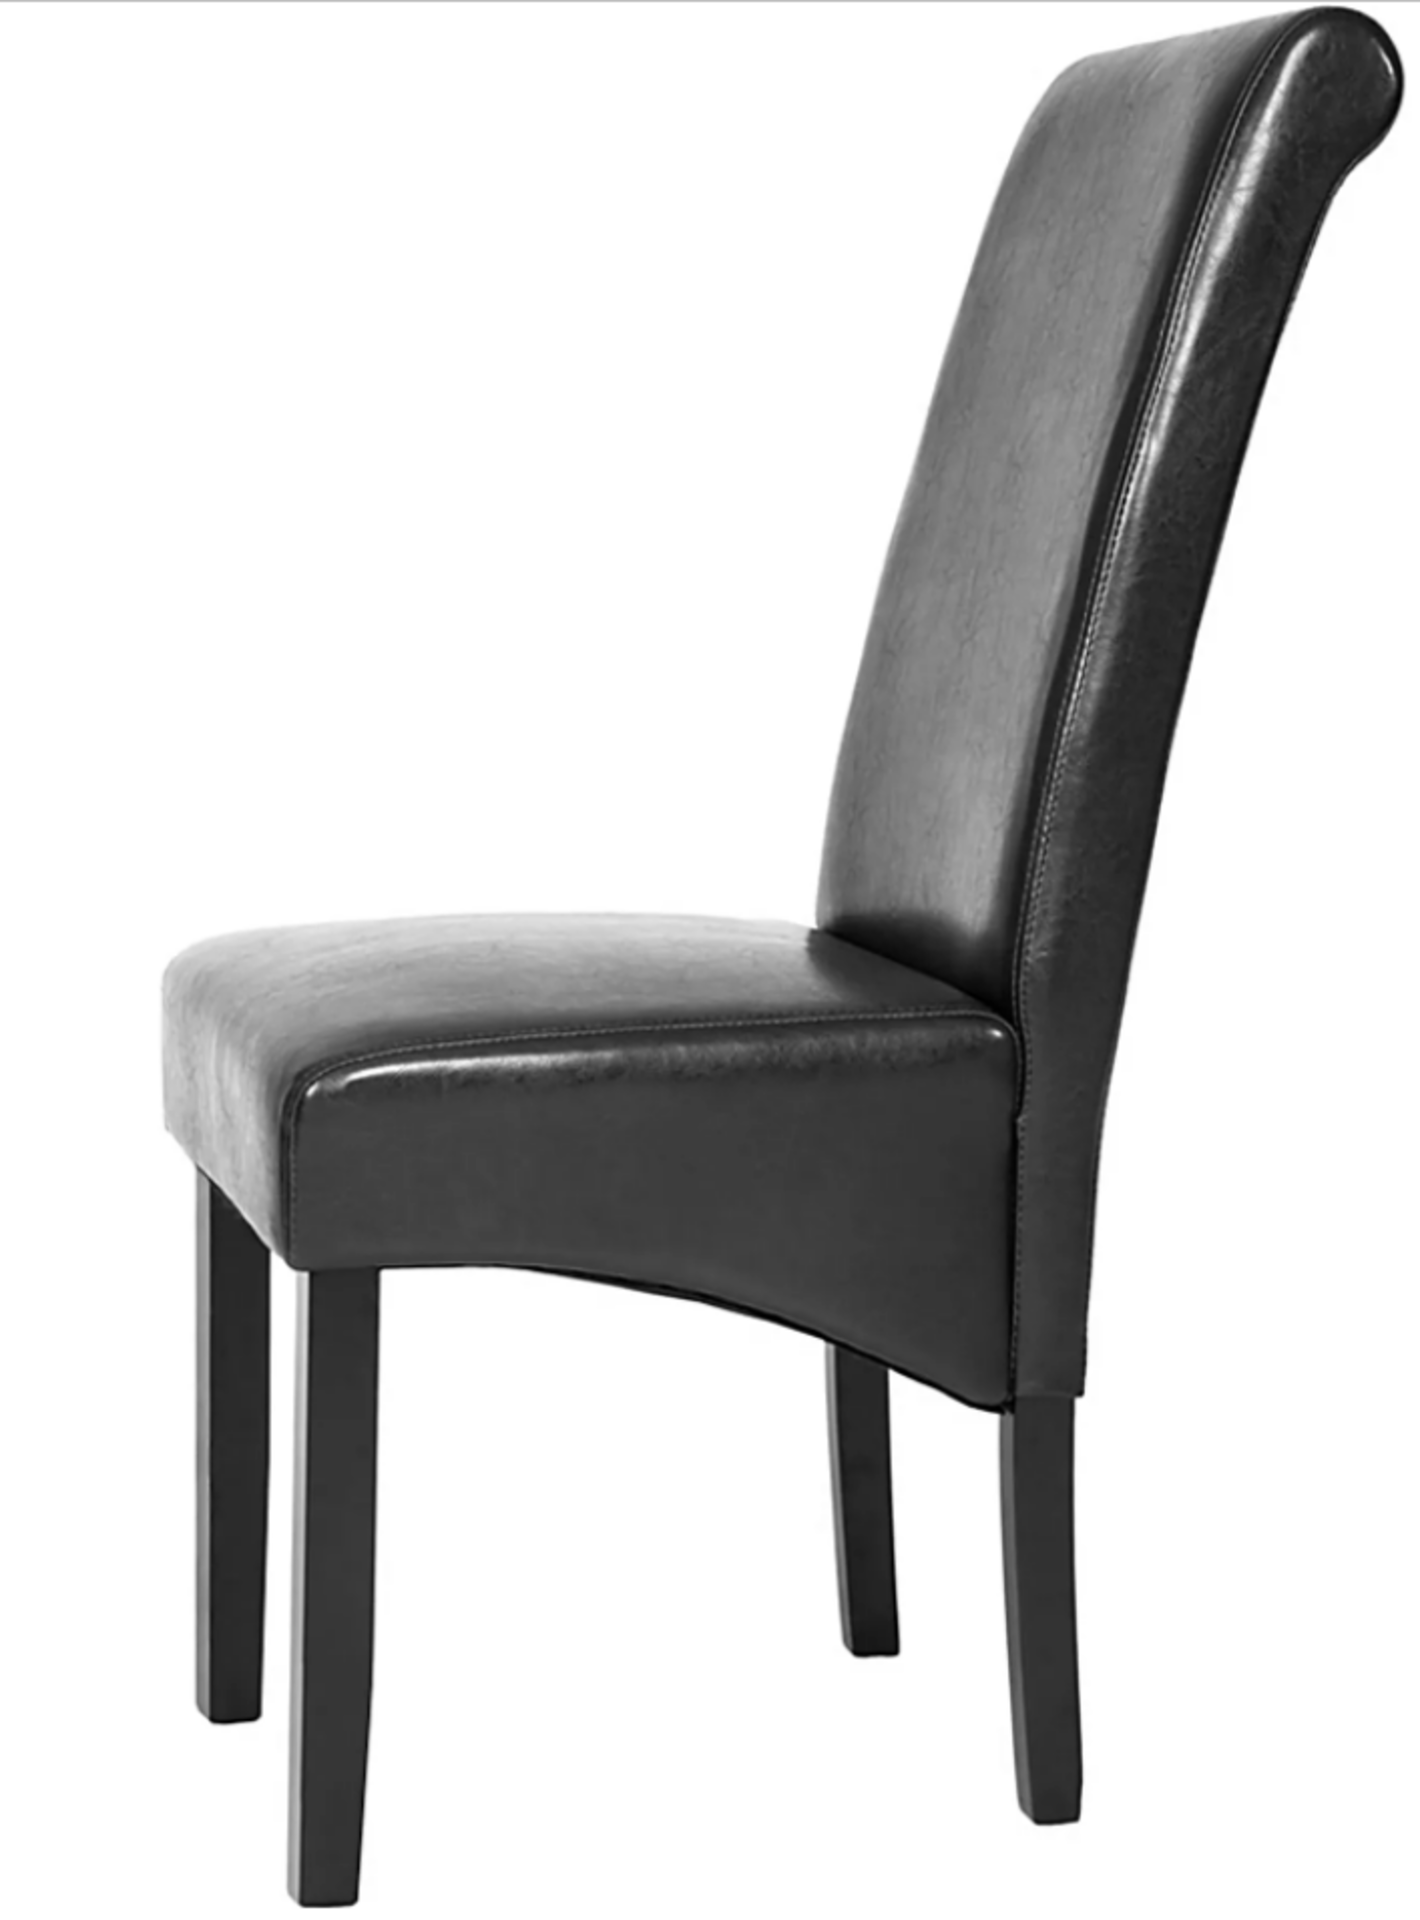 2x Tectake Dining Chairs With Ergonomic Seat Shape Black RRP œ58.99